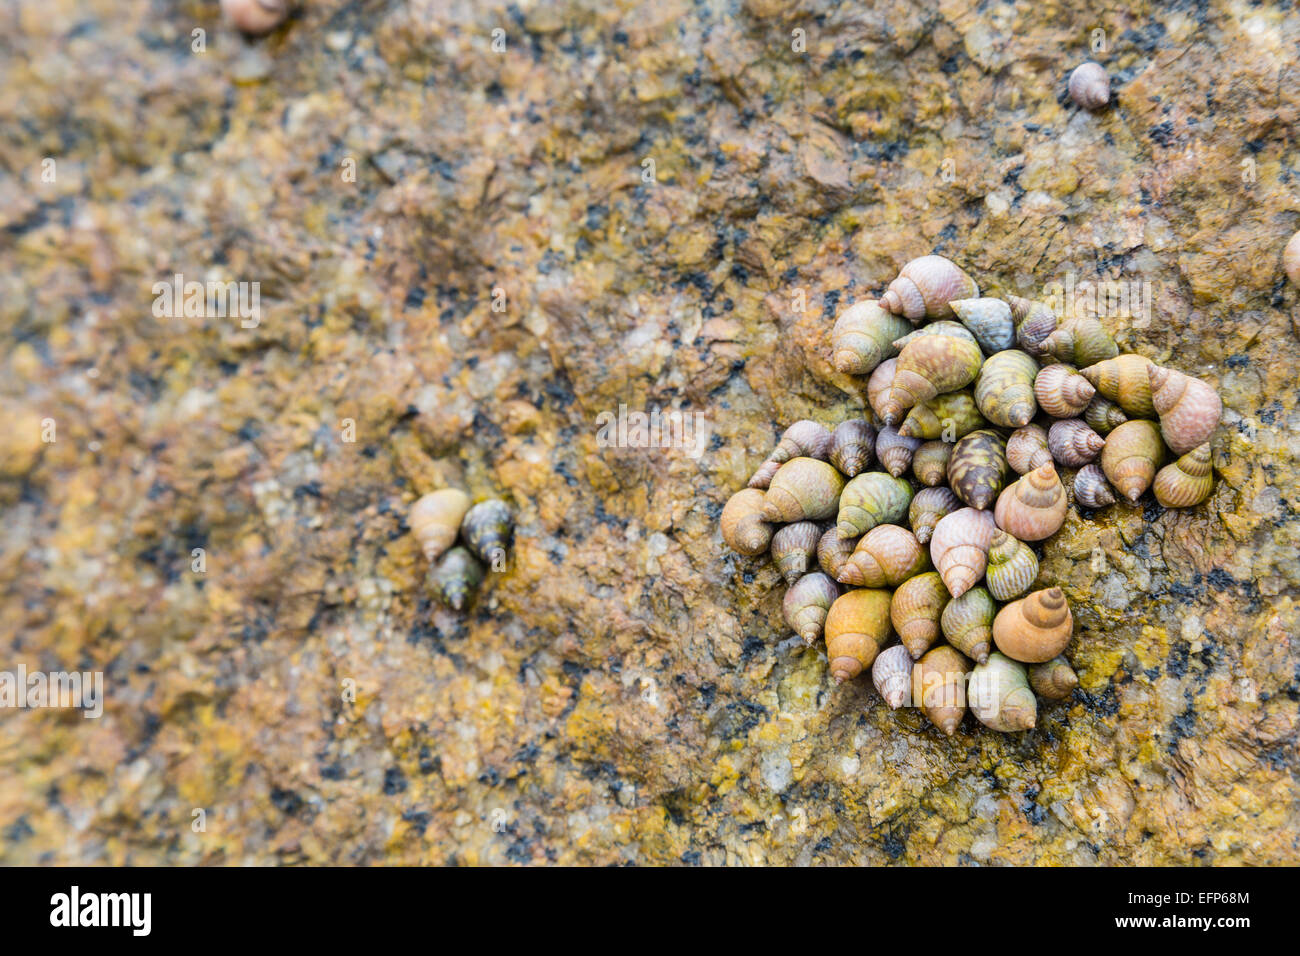 A tightly packed group of sea shells on a granite rock in La Digue, Seychelles with Stock Photo